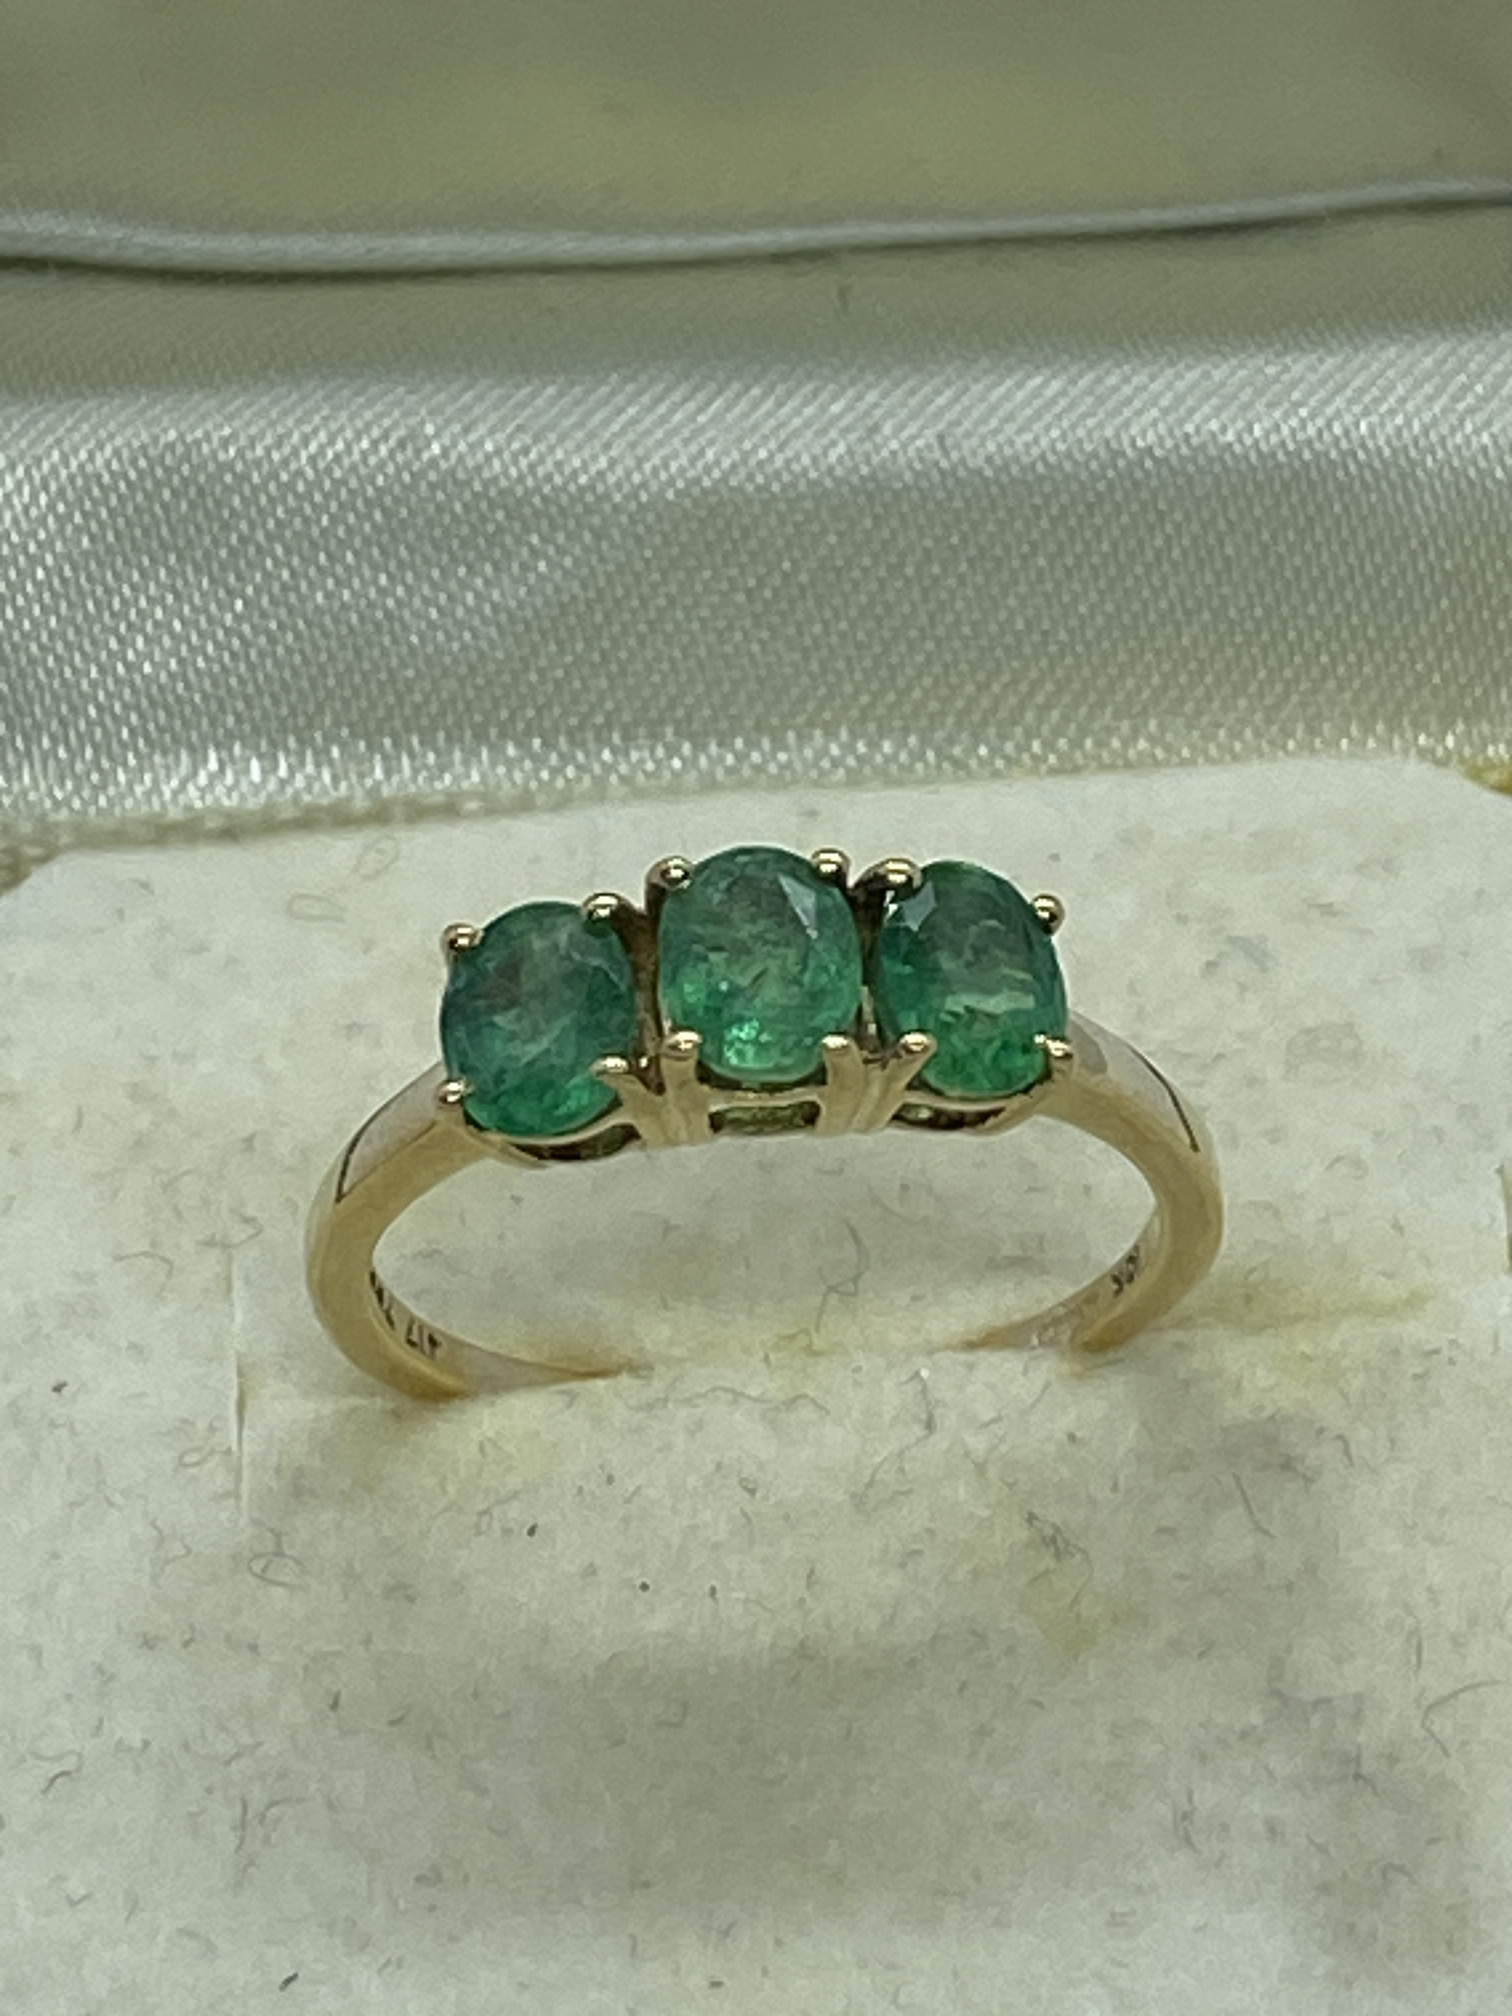 1.01ct ZAMBIAN EMERALD 9ct GOLD RING APPROX. RING SIZE L 1/2 - Image 2 of 2